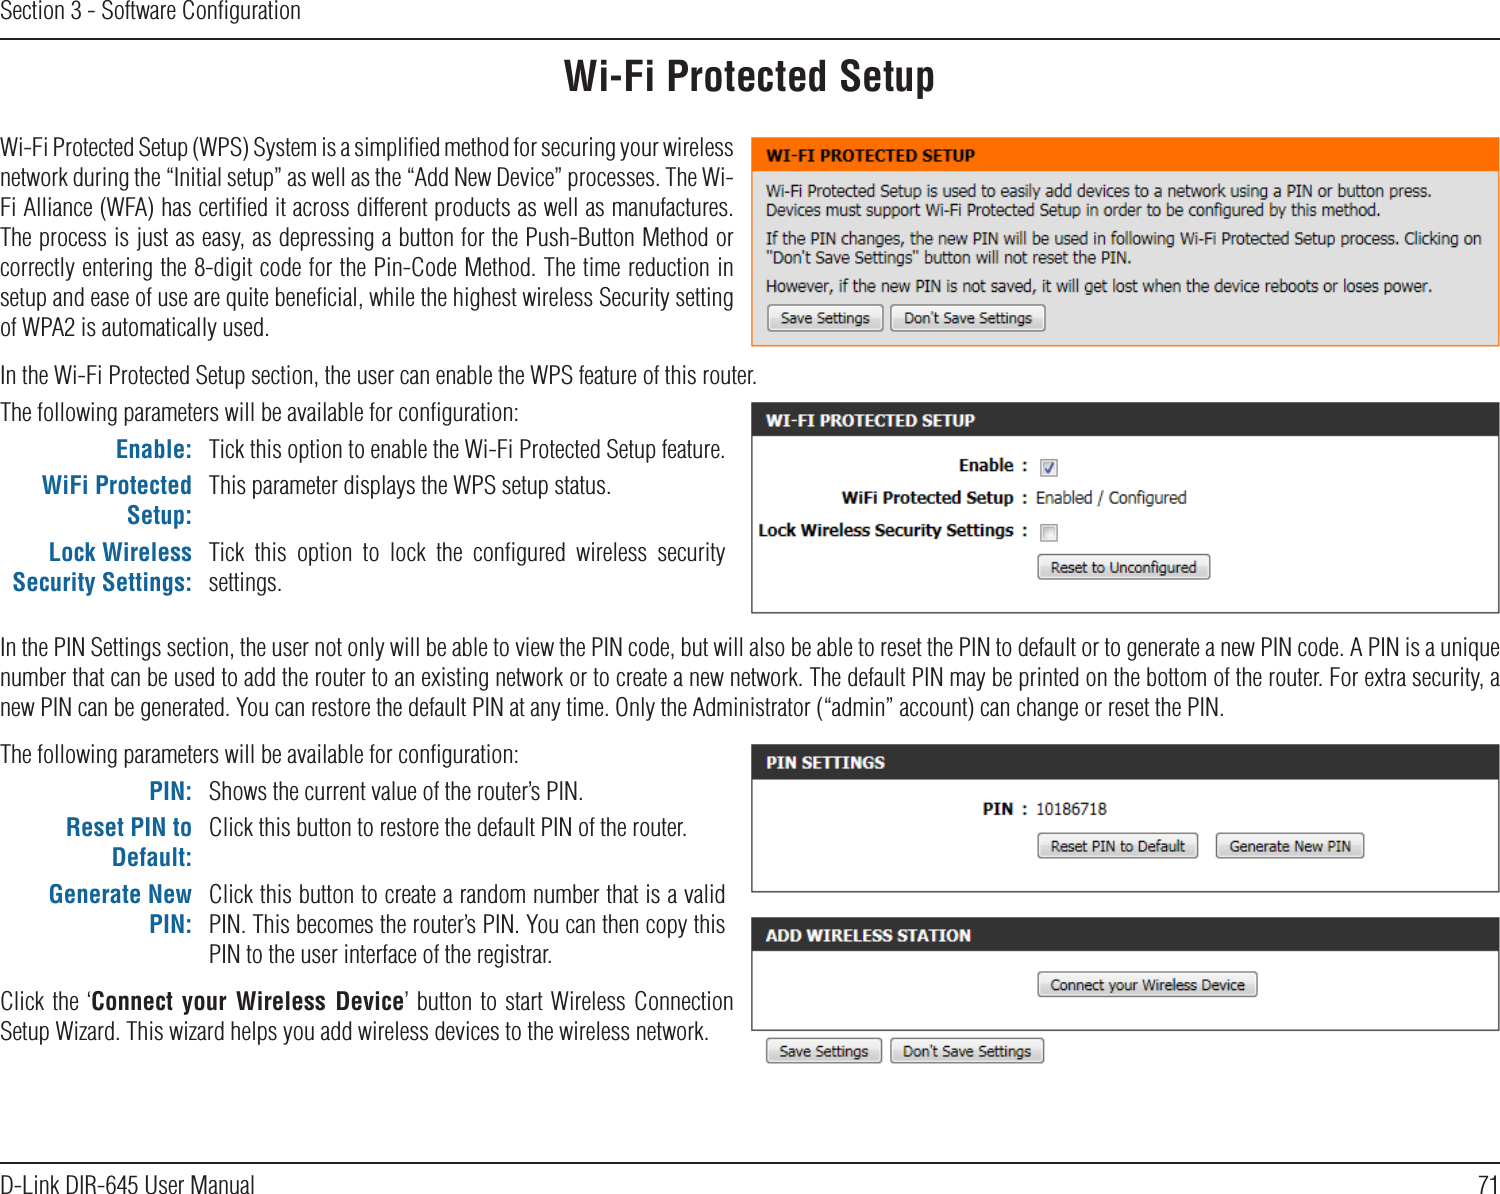 71D-Link DIR-645 User ManualSection 3 - Software ConﬁgurationWi-Fi Protected SetupWi-Fi Protected Setup (WPS) System is a simpliﬁed method for securing your wireless network during the “Initial setup” as well as the “Add New Device” processes. The Wi-Fi Alliance (WFA) has certiﬁed it across different products as well as manufactures. The process is just as easy, as depressing a button for the Push-Button Method or correctly entering the 8-digit code for the Pin-Code Method. The time reduction in setup and ease of use are quite beneﬁcial, while the highest wireless Security setting of WPA2 is automatically used.The following parameters will be available for conﬁguration:Enable: Tick this option to enable the Wi-Fi Protected Setup feature.WiFi Protected Setup:This parameter displays the WPS setup status.Lock Wireless Security Settings:Tick  this  option  to  lock  the  conﬁgured  wireless  security settings.In the PIN Settings section, the user not only will be able to view the PIN code, but will also be able to reset the PIN to default or to generate a new PIN code. A PIN is a unique number that can be used to add the router to an existing network or to create a new network. The default PIN may be printed on the bottom of the router. For extra security, a new PIN can be generated. You can restore the default PIN at any time. Only the Administrator (“admin” account) can change or reset the PIN.In the Wi-Fi Protected Setup section, the user can enable the WPS feature of this router. The following parameters will be available for conﬁguration:PIN: Shows the current value of the router’s PIN.Reset PIN to Default:Click this button to restore the default PIN of the router.Generate New PIN:Click this button to create a random number that is a valid PIN. This becomes the router’s PIN. You can then copy this PIN to the user interface of the registrar.Click the  ‘Connect  your  Wireless  Device’ button to start Wireless Connection Setup Wizard. This wizard helps you add wireless devices to the wireless network.